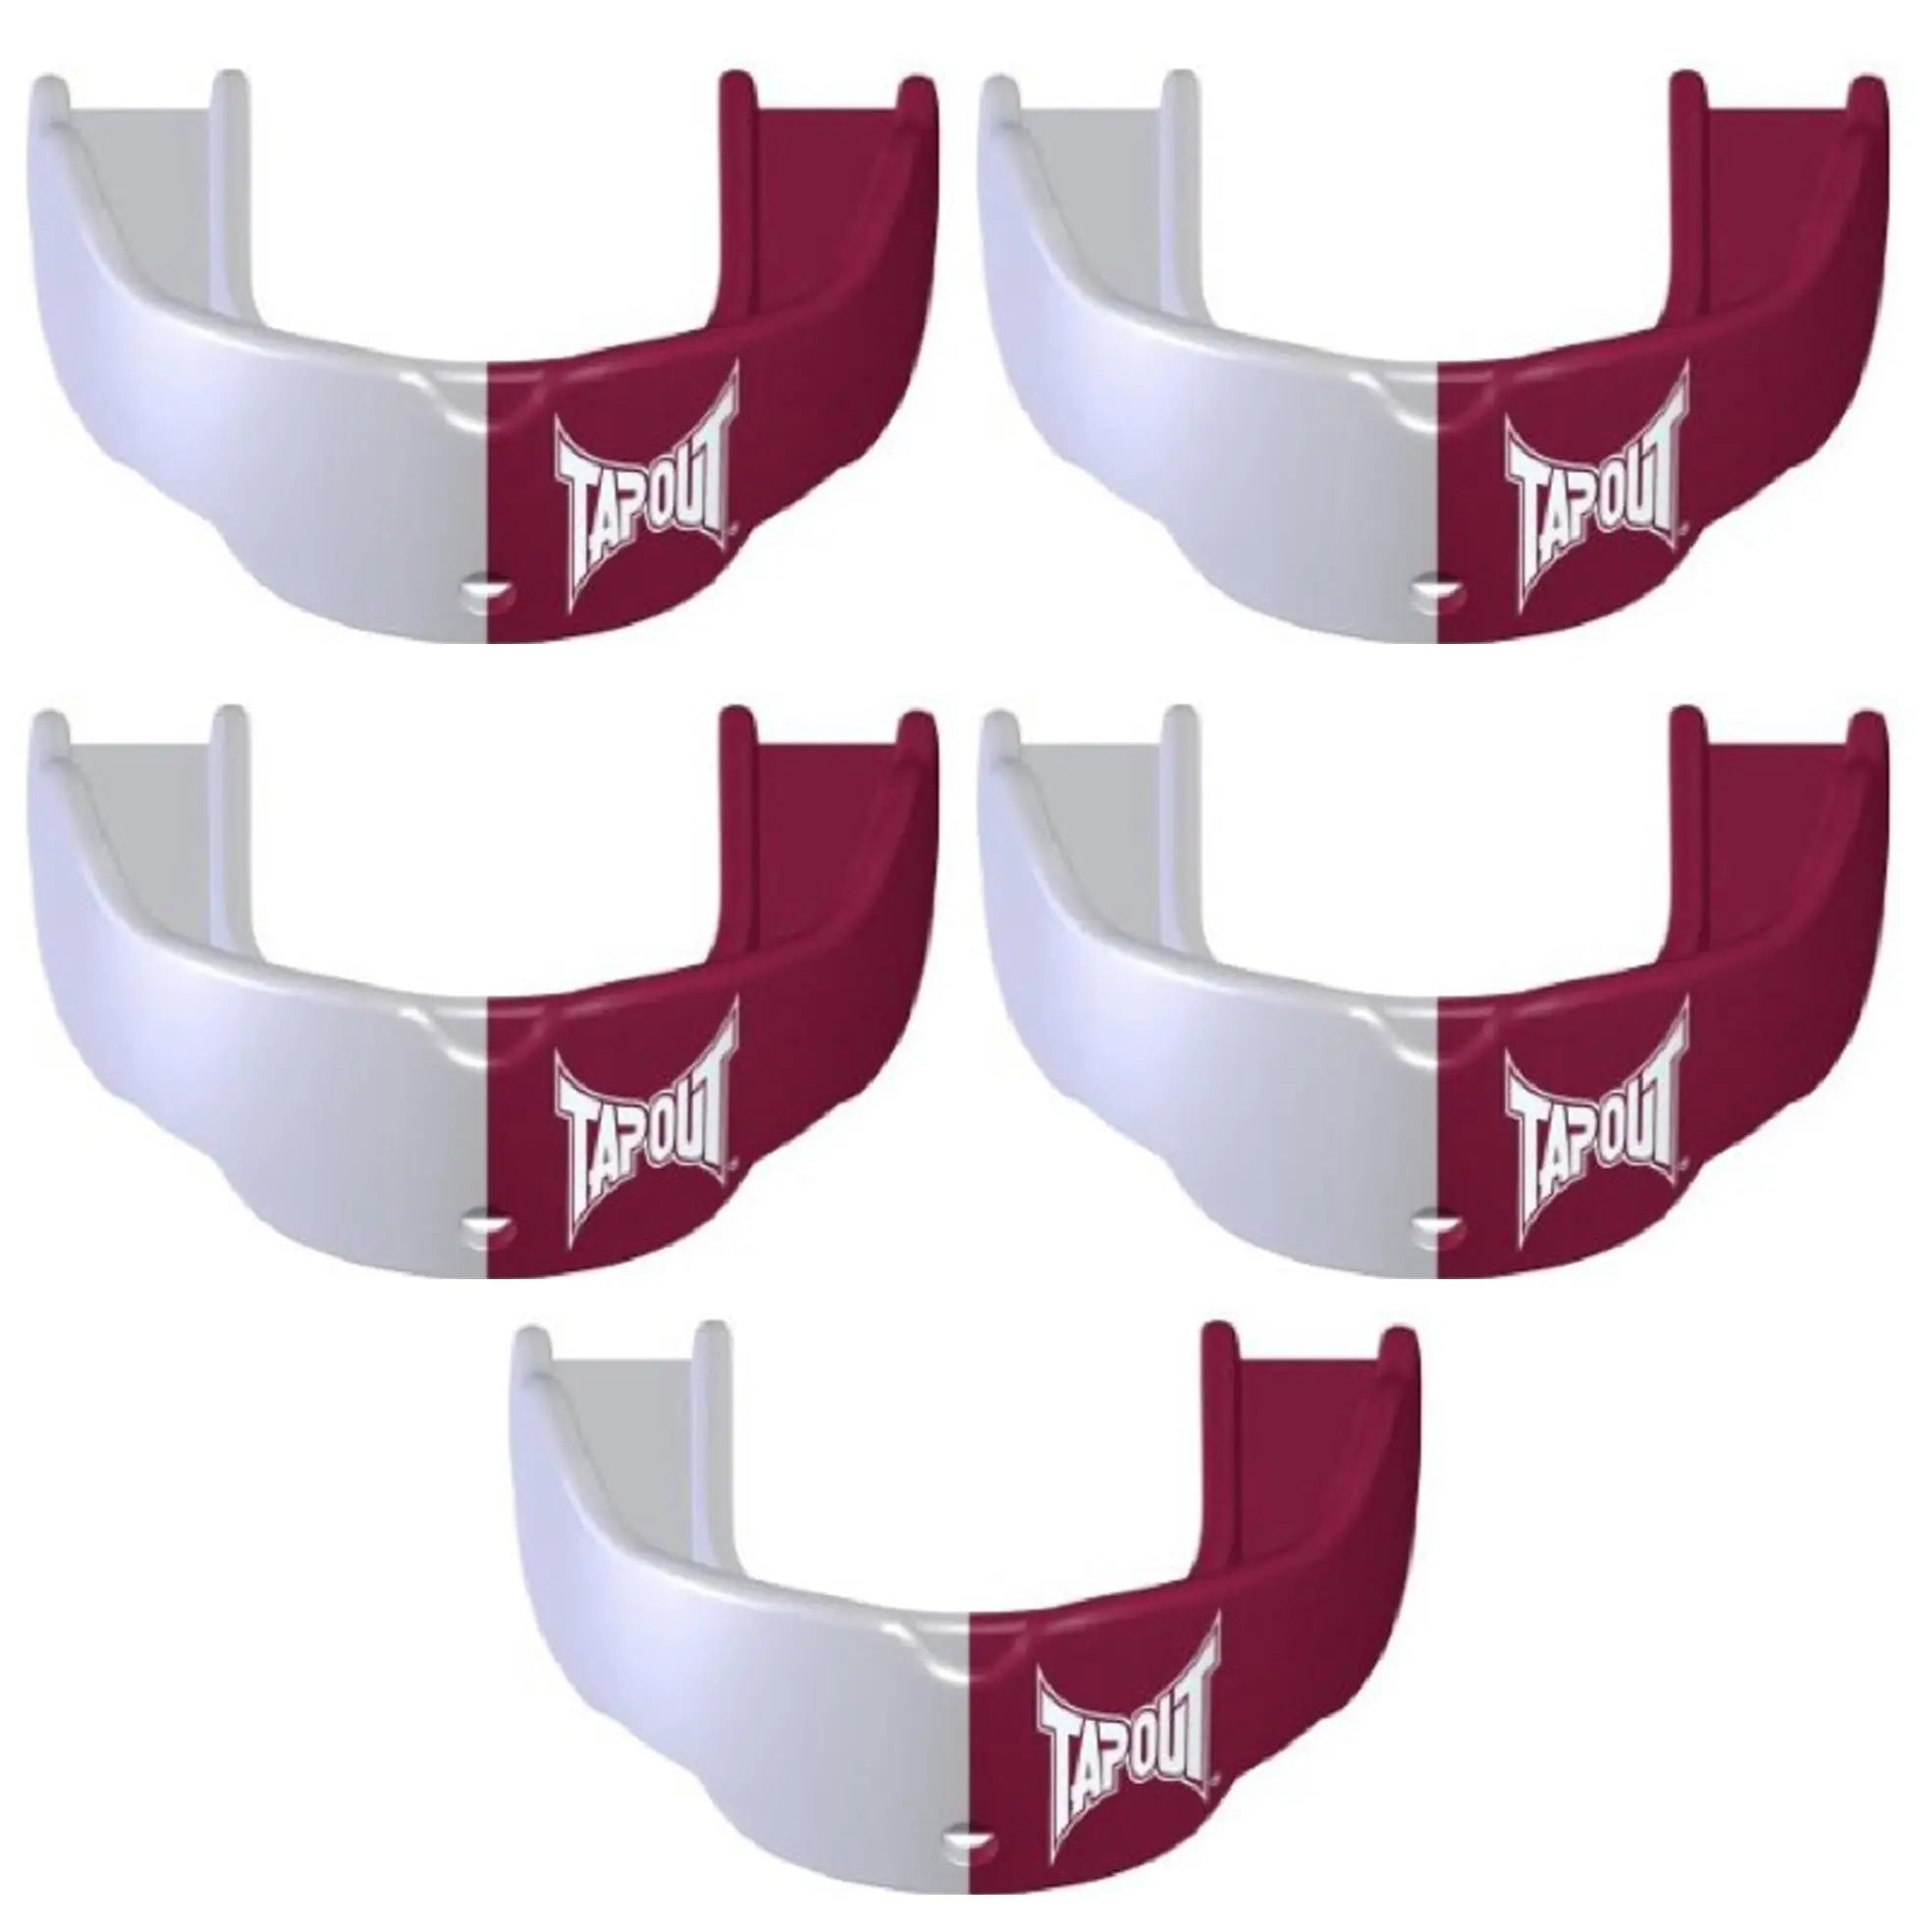 Tapout Youth Protective Sports Mouthguard with Strap 5-Pack - Maroon/White Tapout